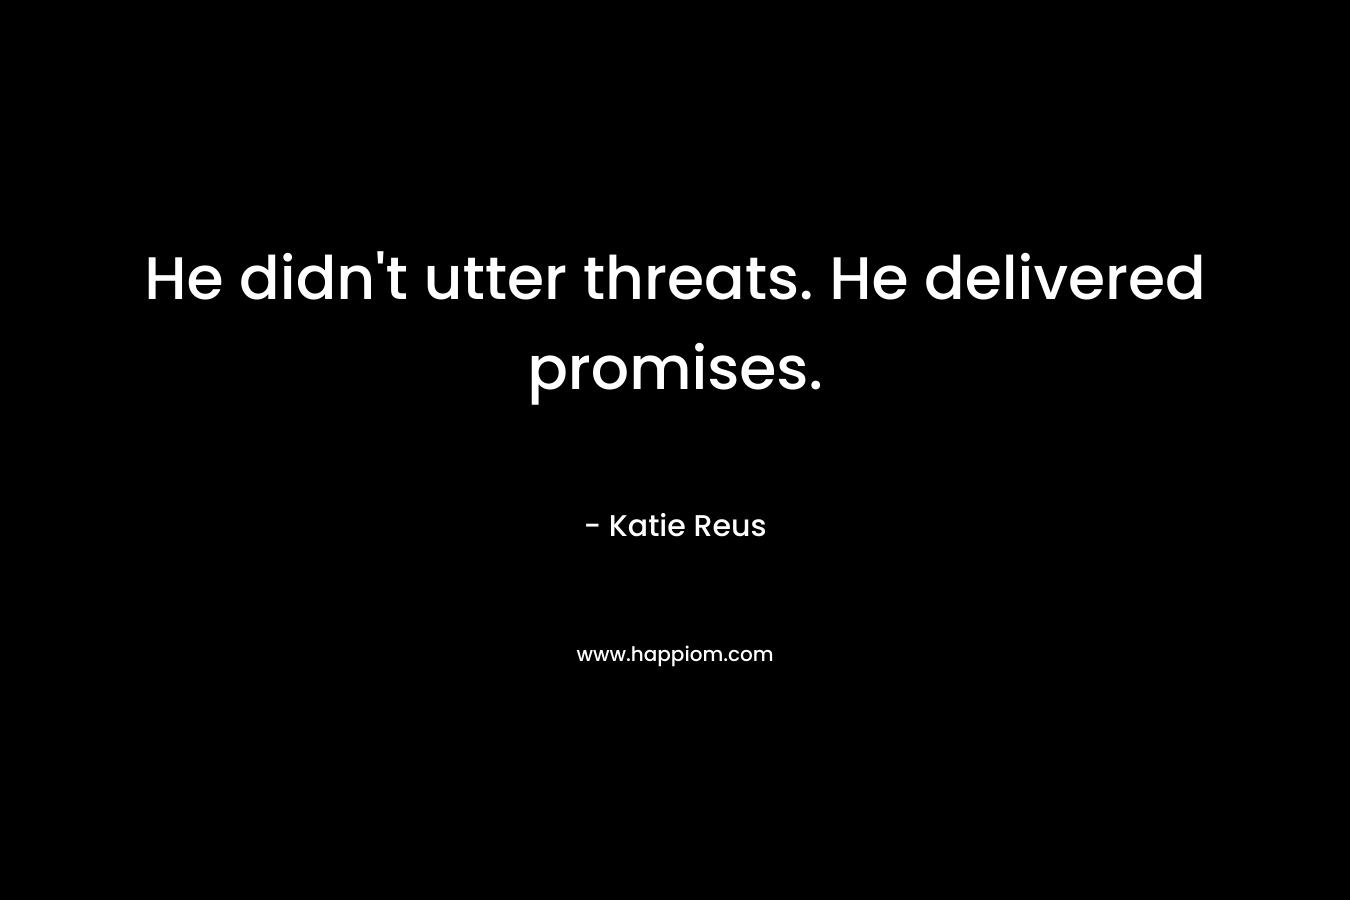 He didn't utter threats. He delivered promises.